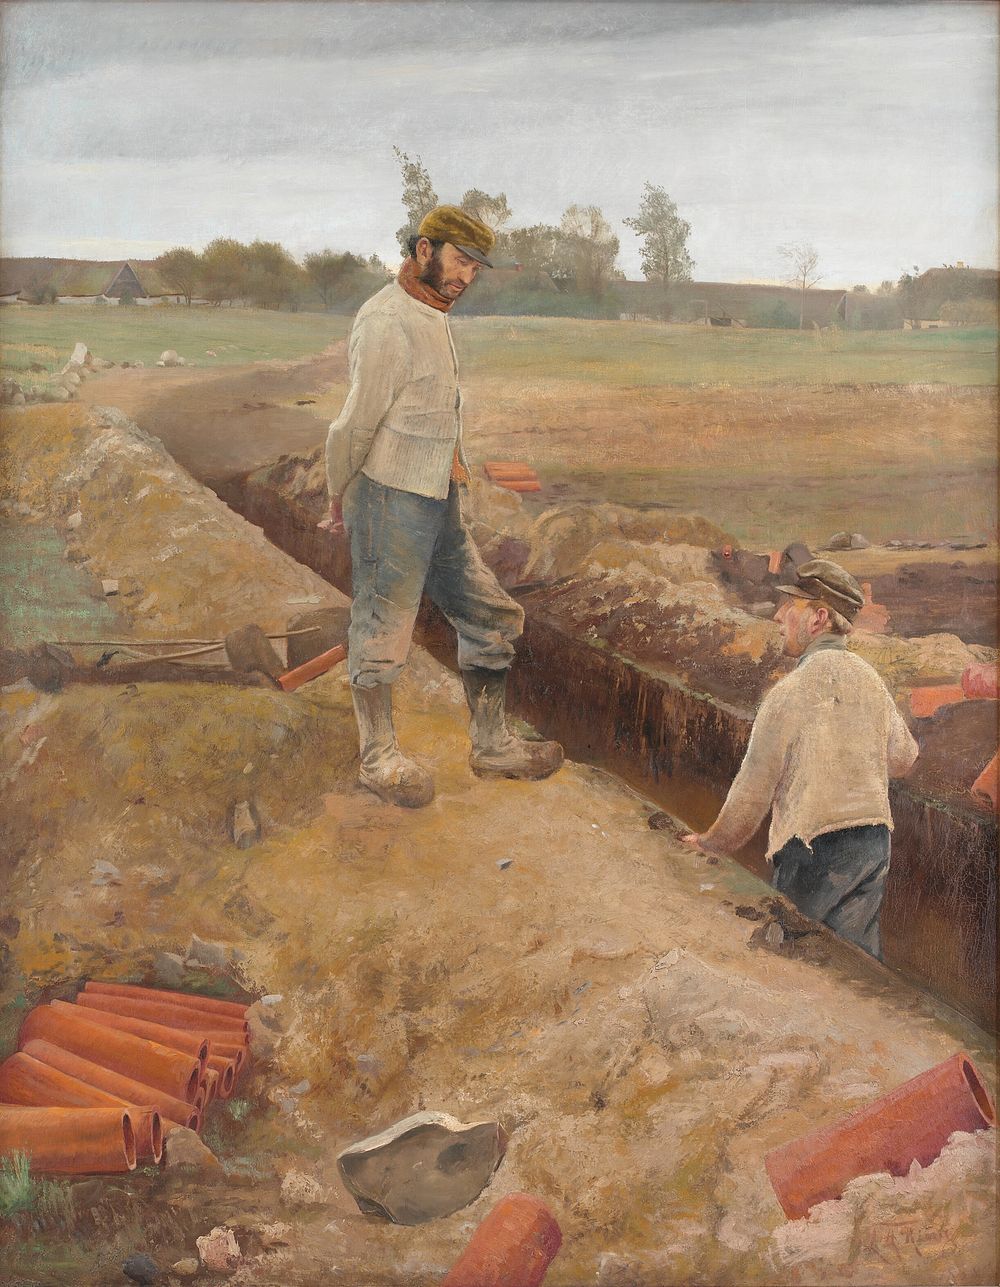 Drain pipe diggers by L. A. Ring